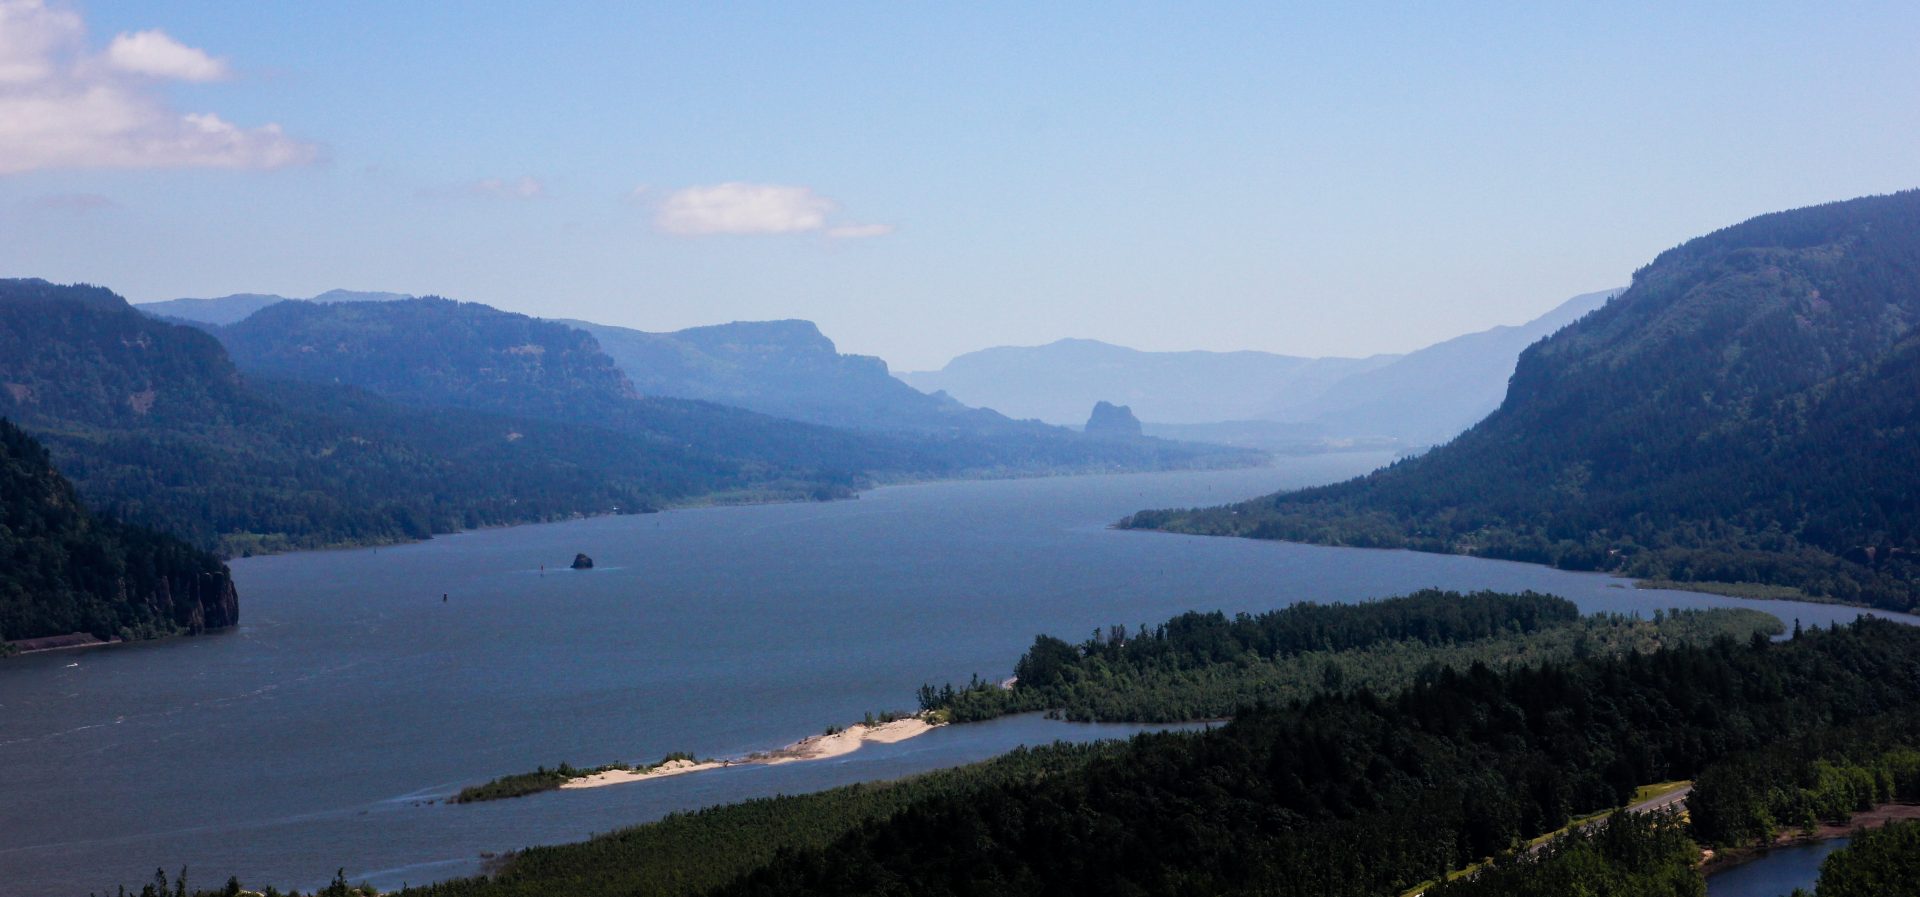 The Columbia River Gorge and Hood River, Oregon